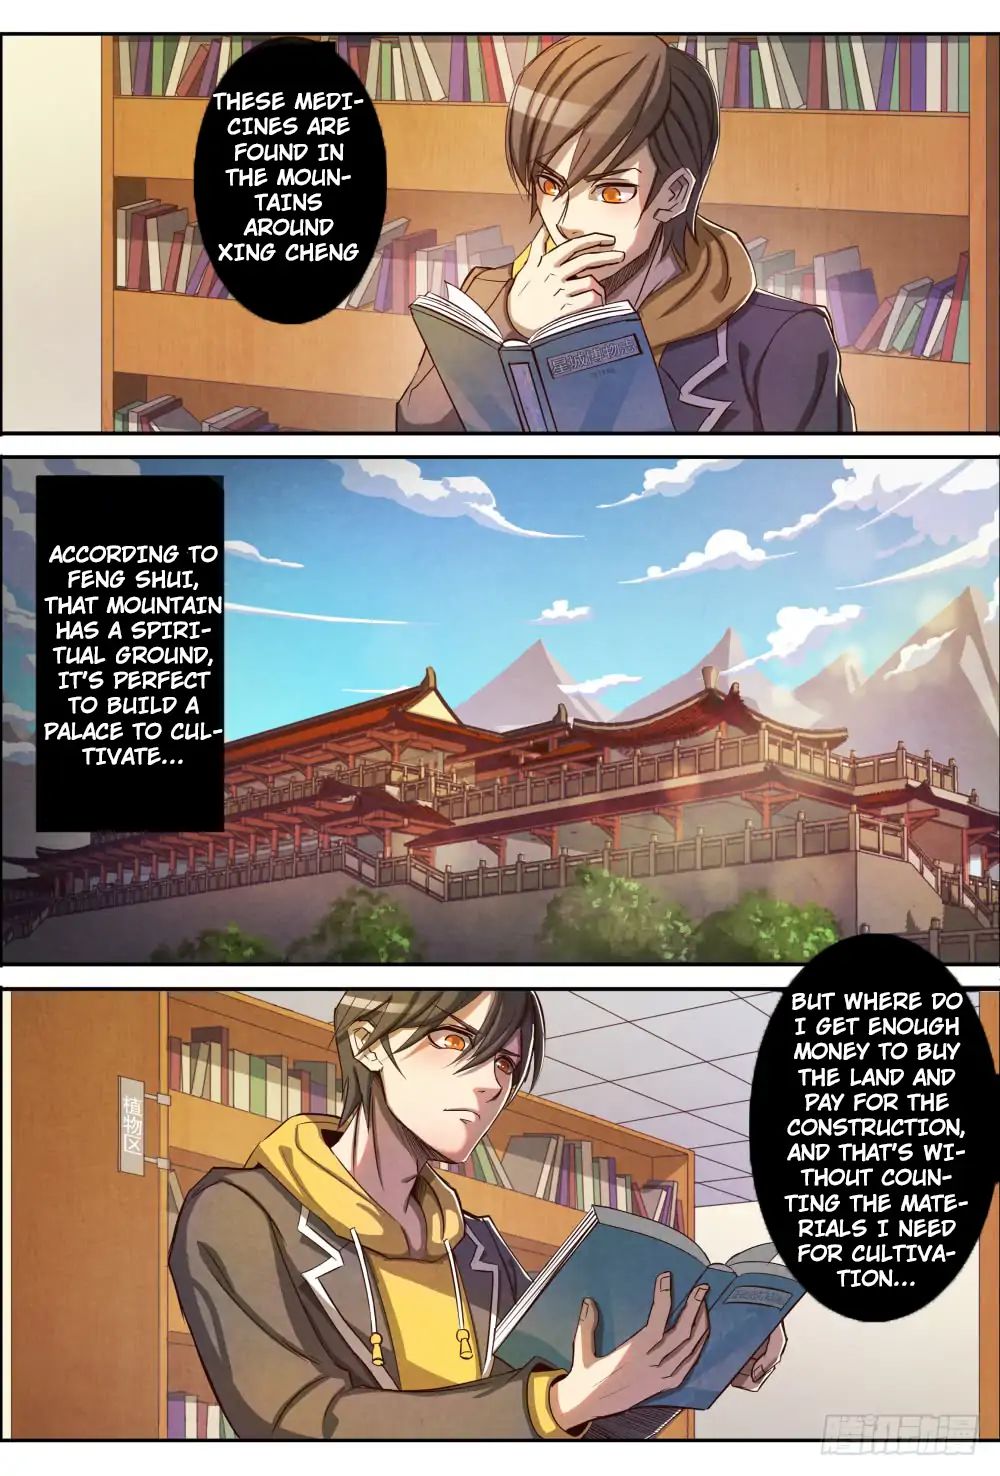 Return From the World of Immortals Vol.1 Chapter 4: Immortal sense